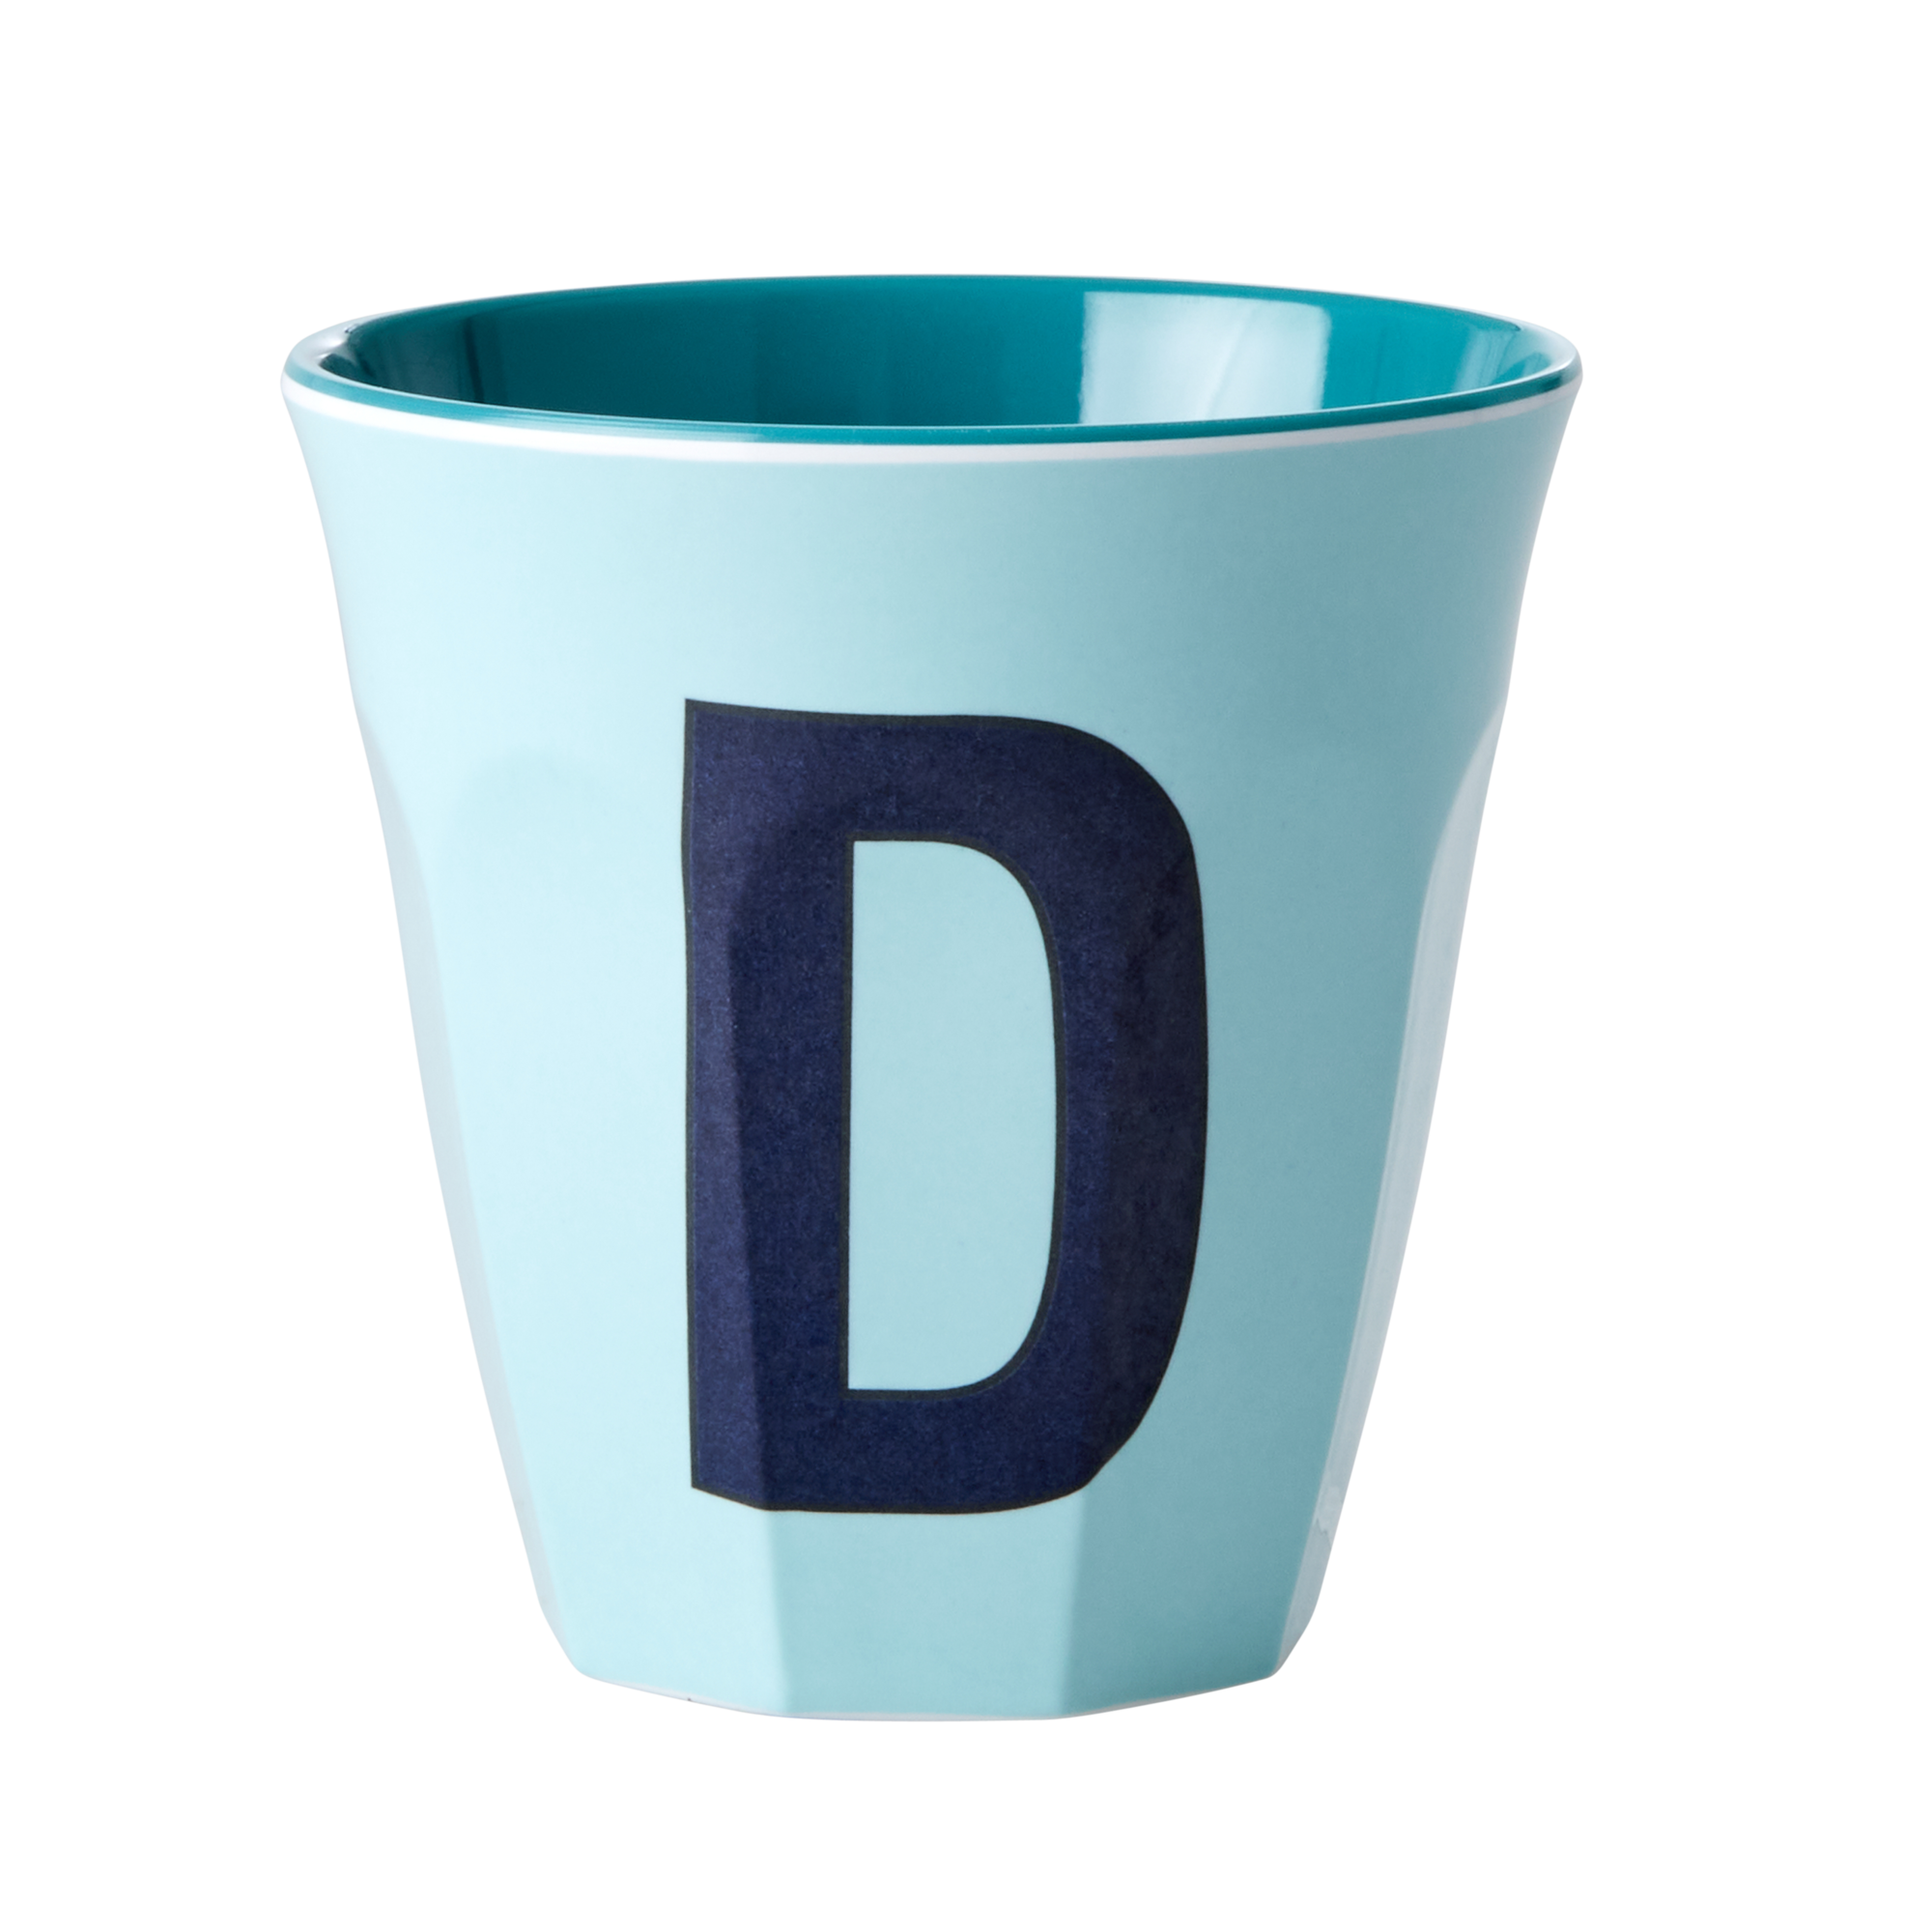 Melamine cup by Rice by Rice in the colors light blue, dark blue, and teal with the letter "D"